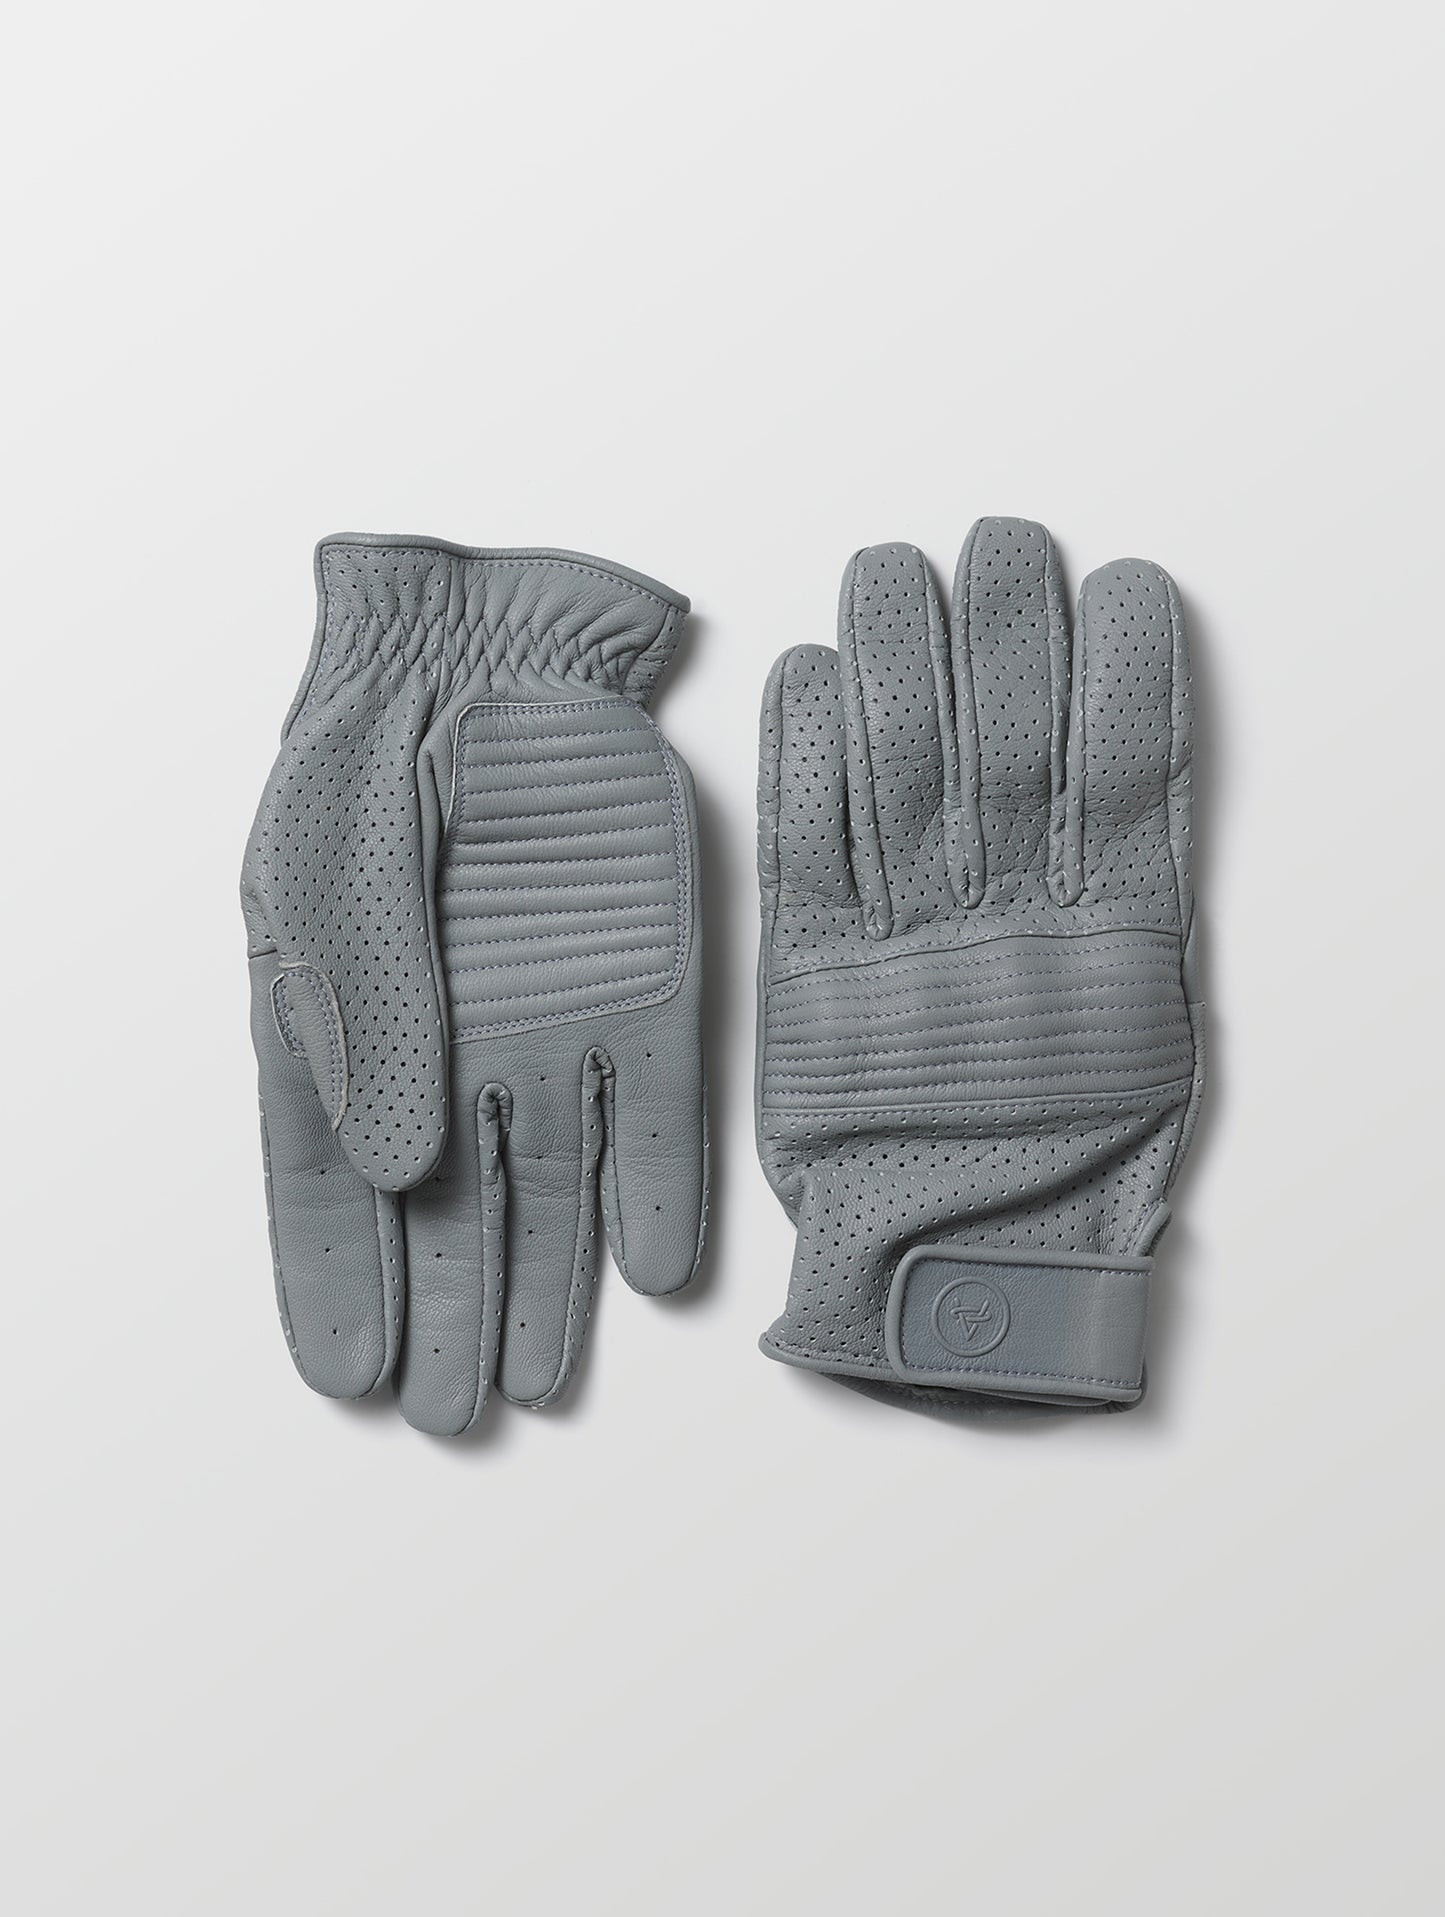 Pair of grey motorcycle gloves from AETHER Apparel